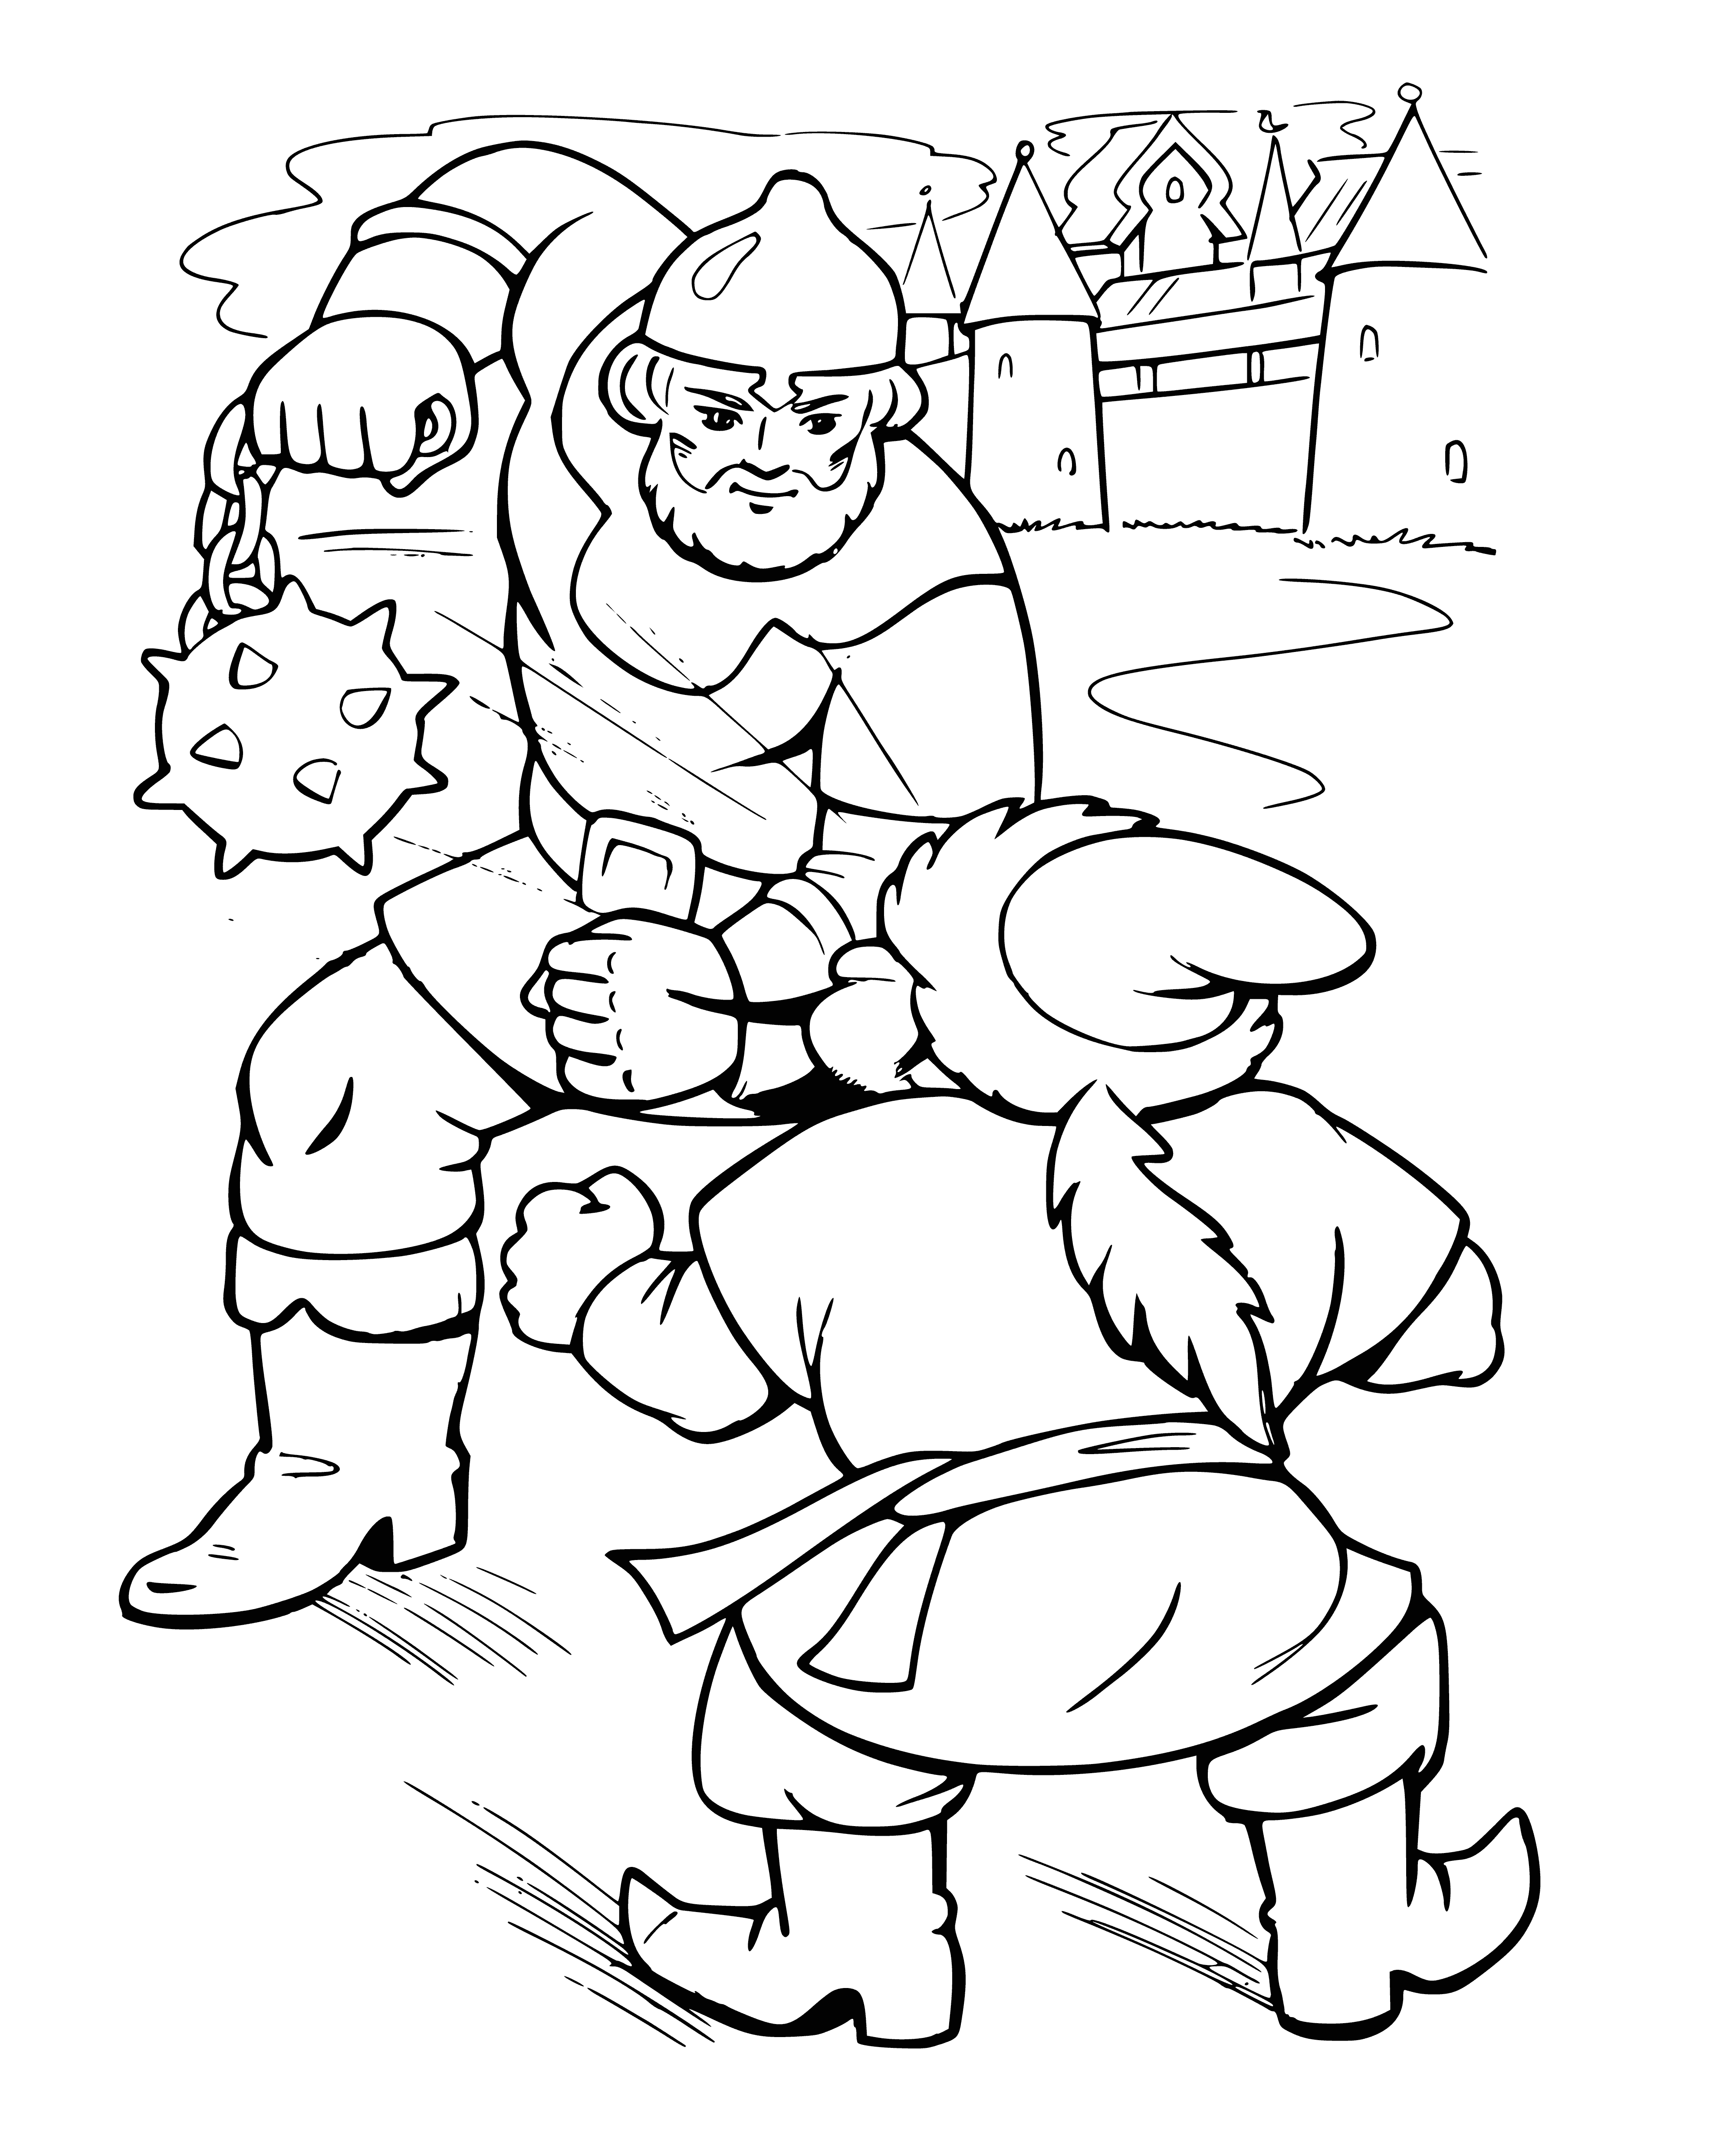 Knocked out a whistling tooth coloring page